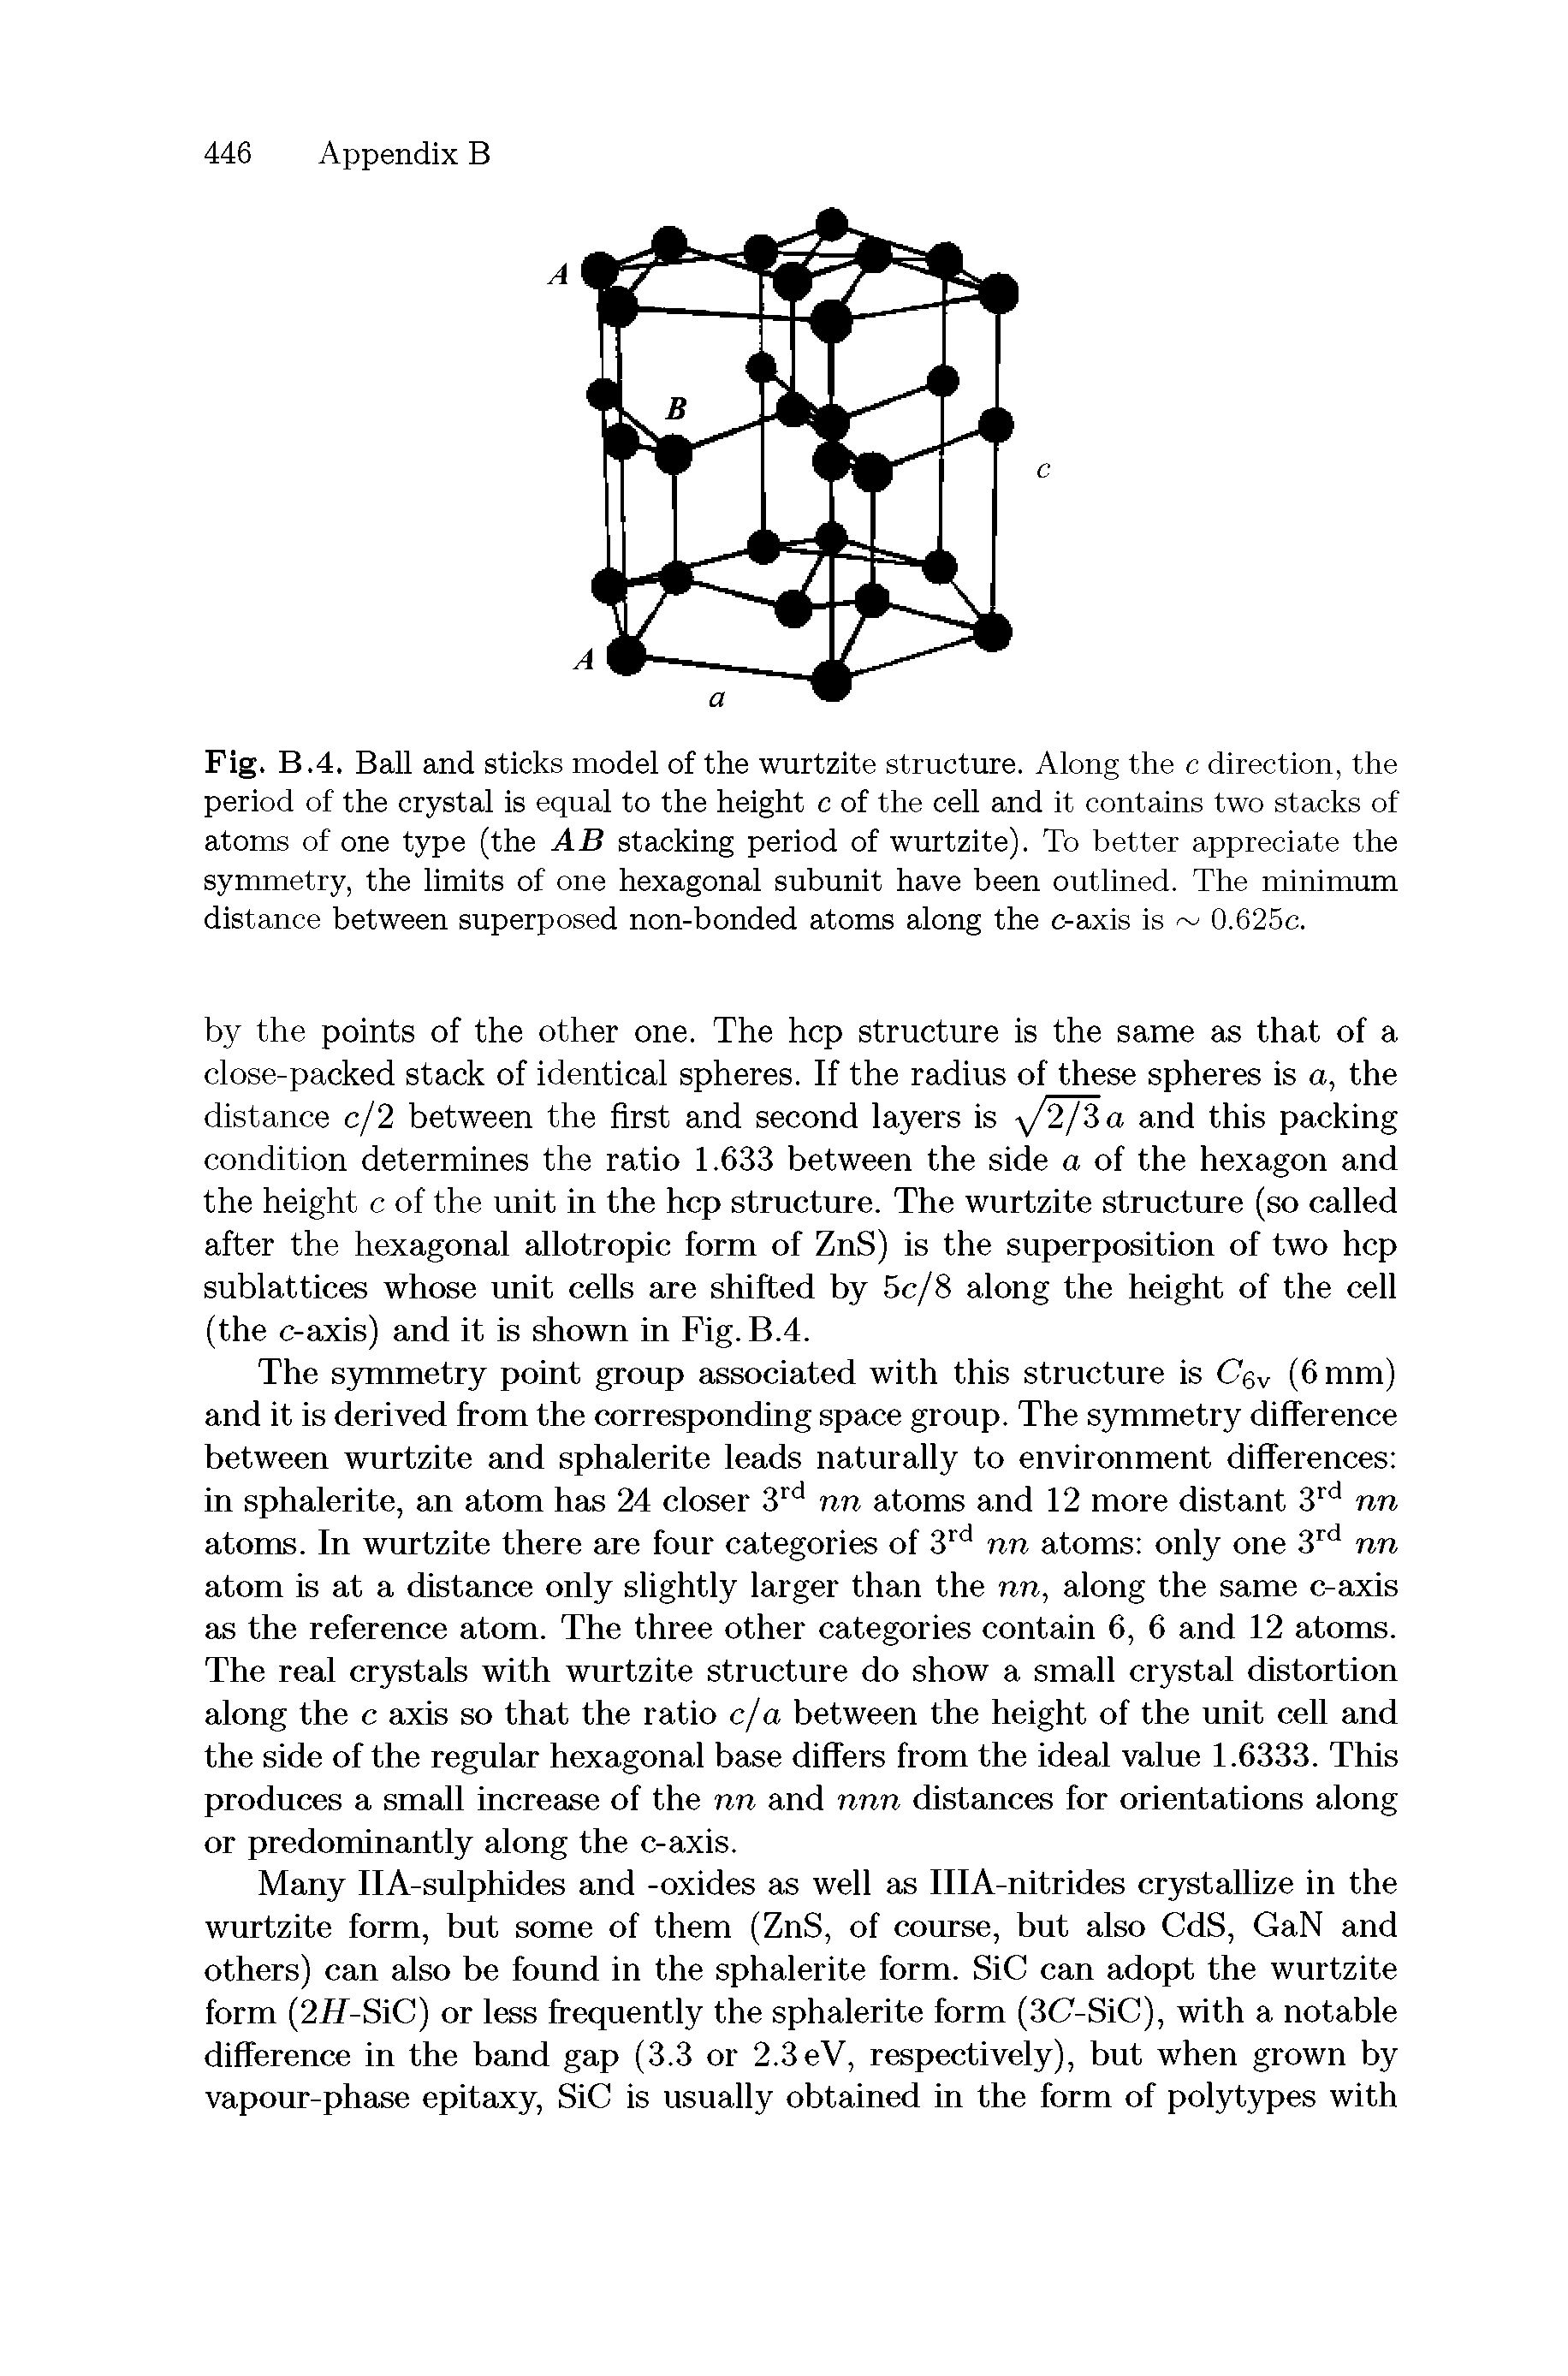 Fig. B.4. Ball and sticks model of the wurtzite structure. Along the c direction, the period of the crystal is equal to the height c of the cell and it contains two stacks of atoms of one type (the AB stacking period of wurtzite). To better appreciate the symmetry, the limits of one hexagonal subunit have been outlined. The minimum distance between superposed non-bonded atoms along the c-axis is 0.625c.